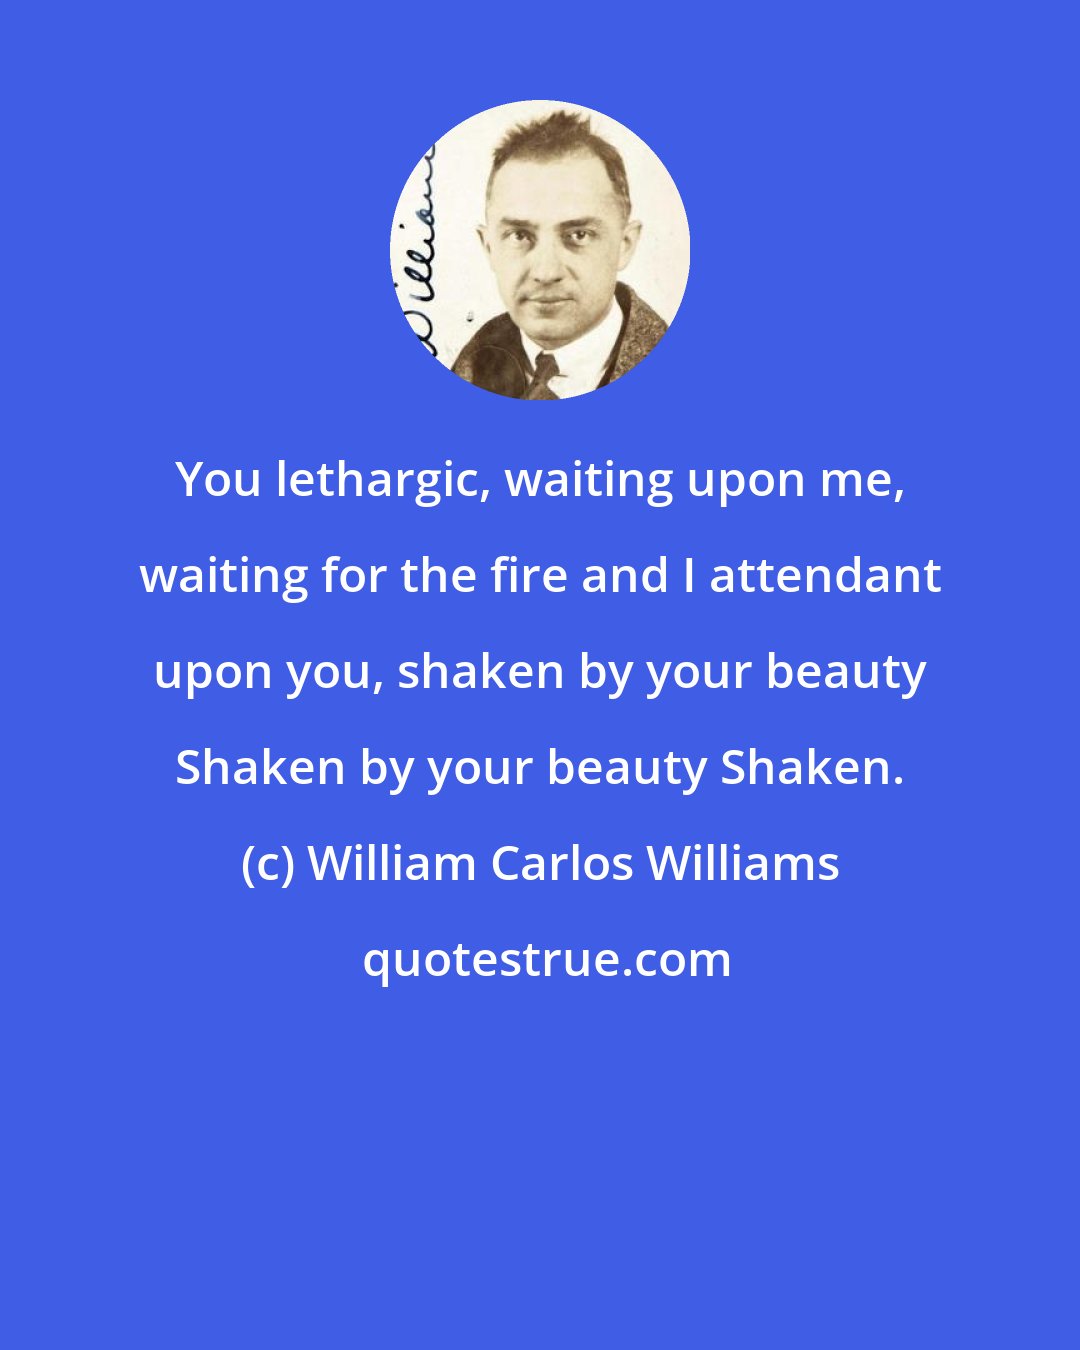 William Carlos Williams: You lethargic, waiting upon me, waiting for the fire and I attendant upon you, shaken by your beauty Shaken by your beauty Shaken.